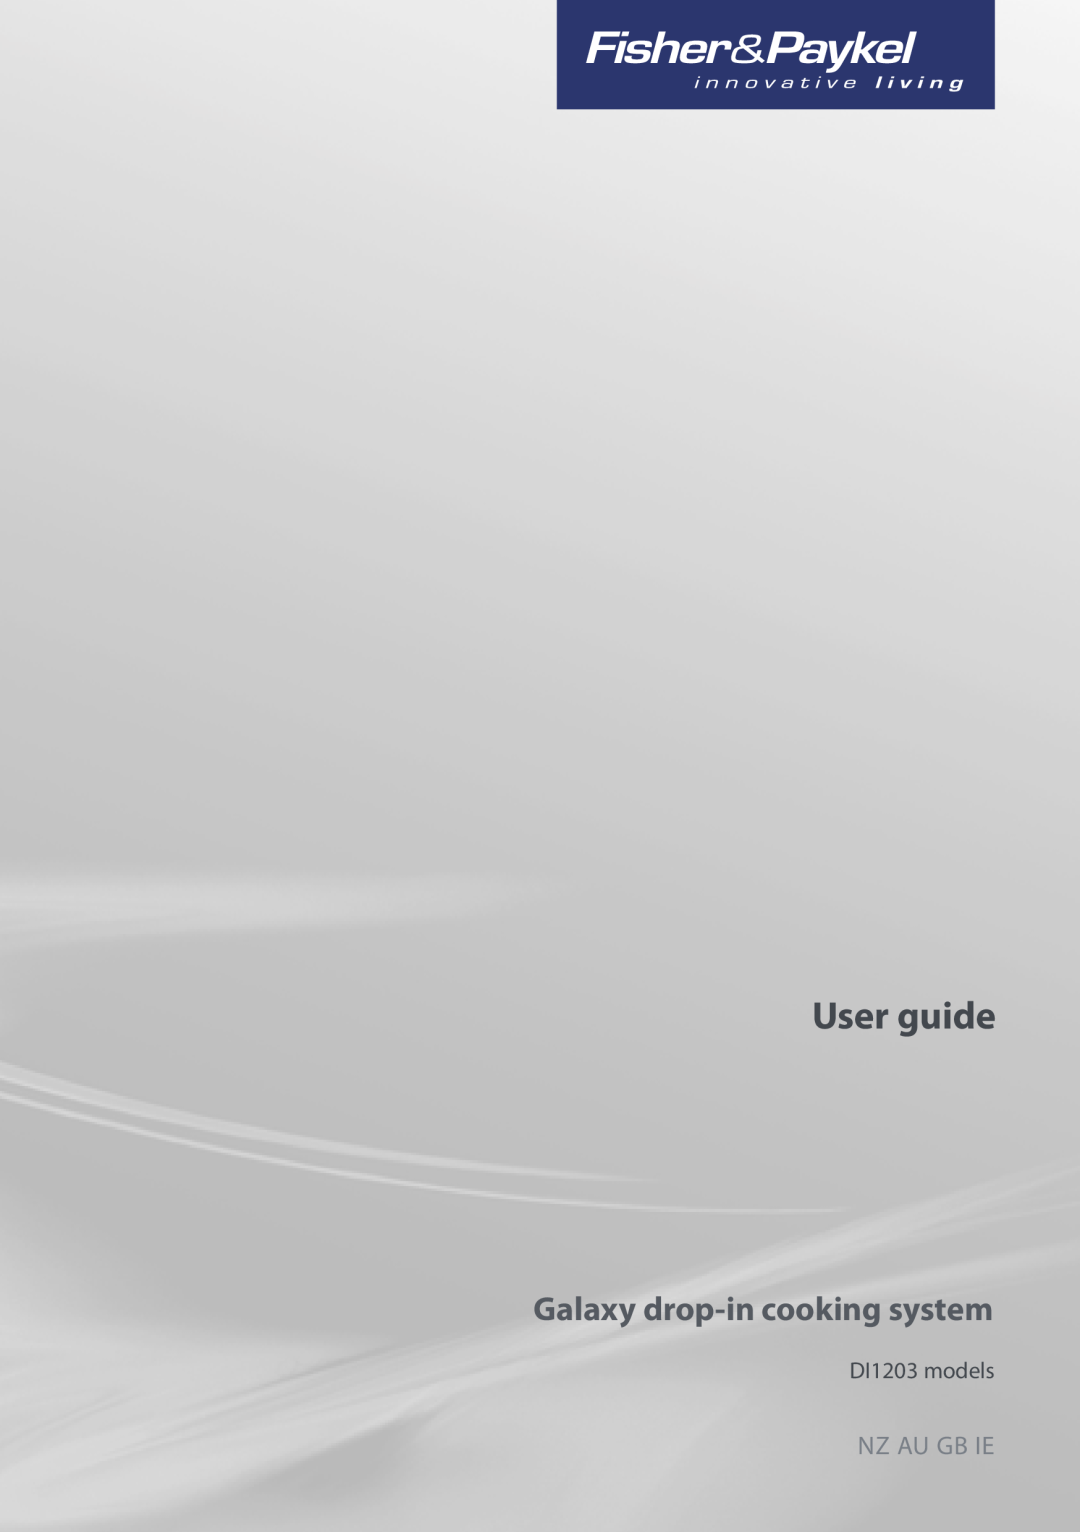 Fisher & Paykel DI1203 manual User guide, Galaxy drop-in cooking system, Nz Au Gb Ie 